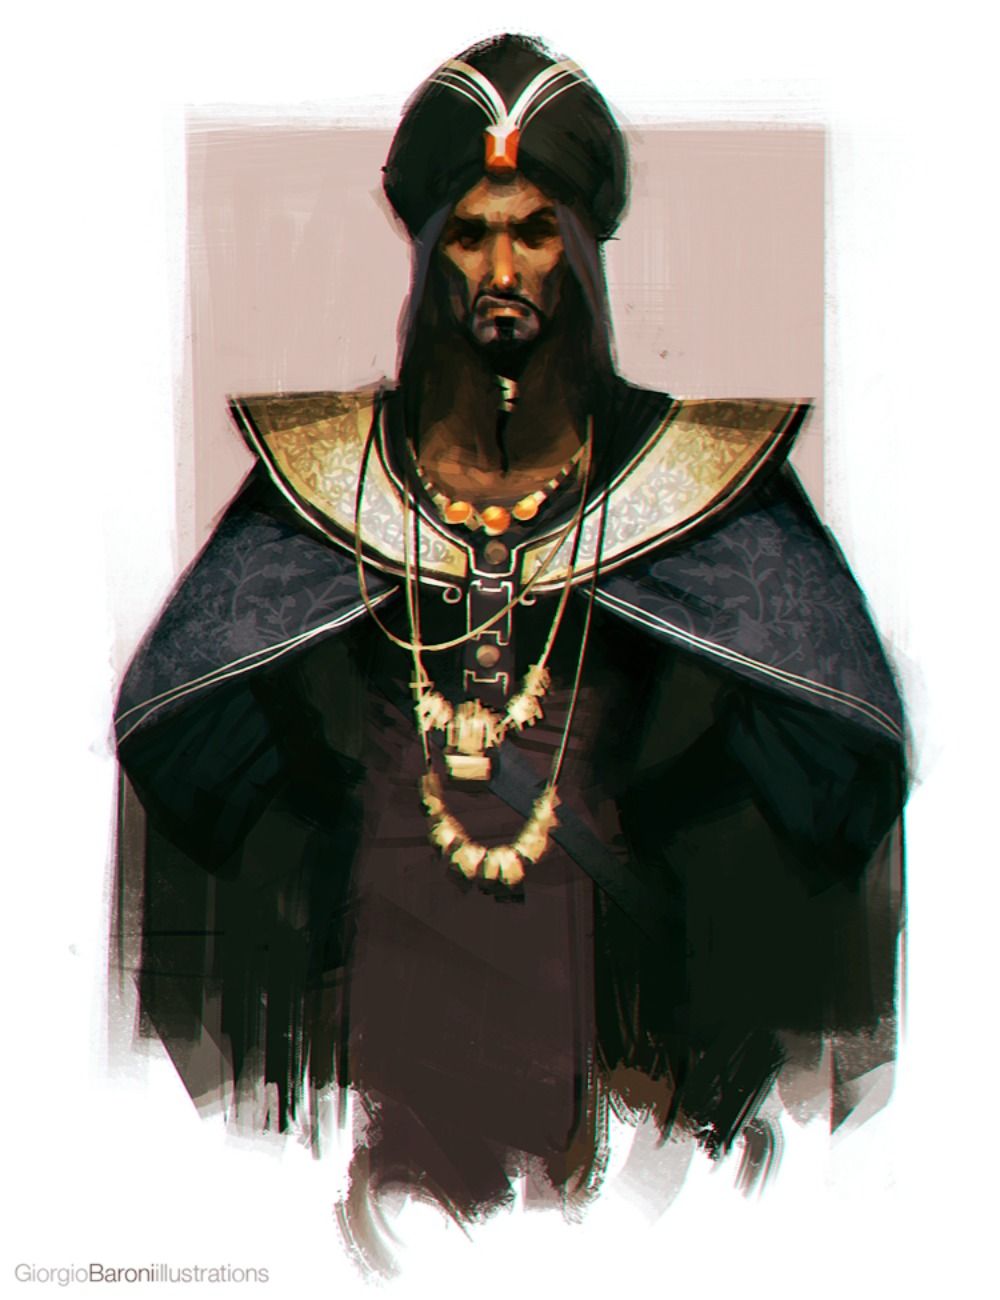 Aladdin 10 Fan Art Pieces Of Jafar That Will Give You The Chills